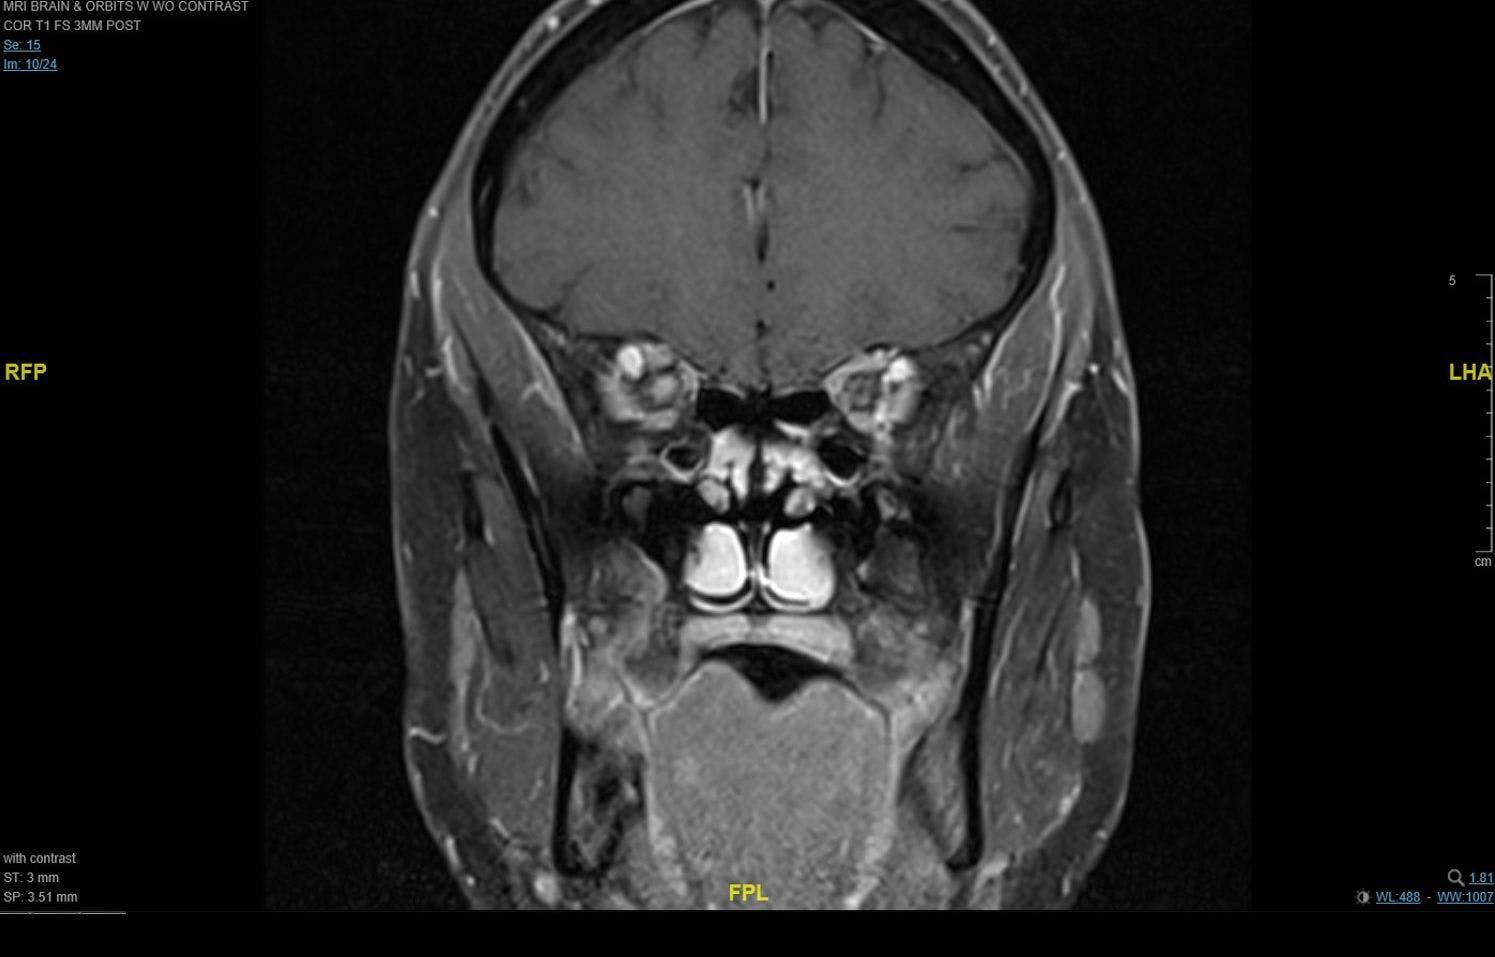 Figure 4. Brain and orbit MRI showing enhancement of the right optic nerve in a patient with optic neuritis